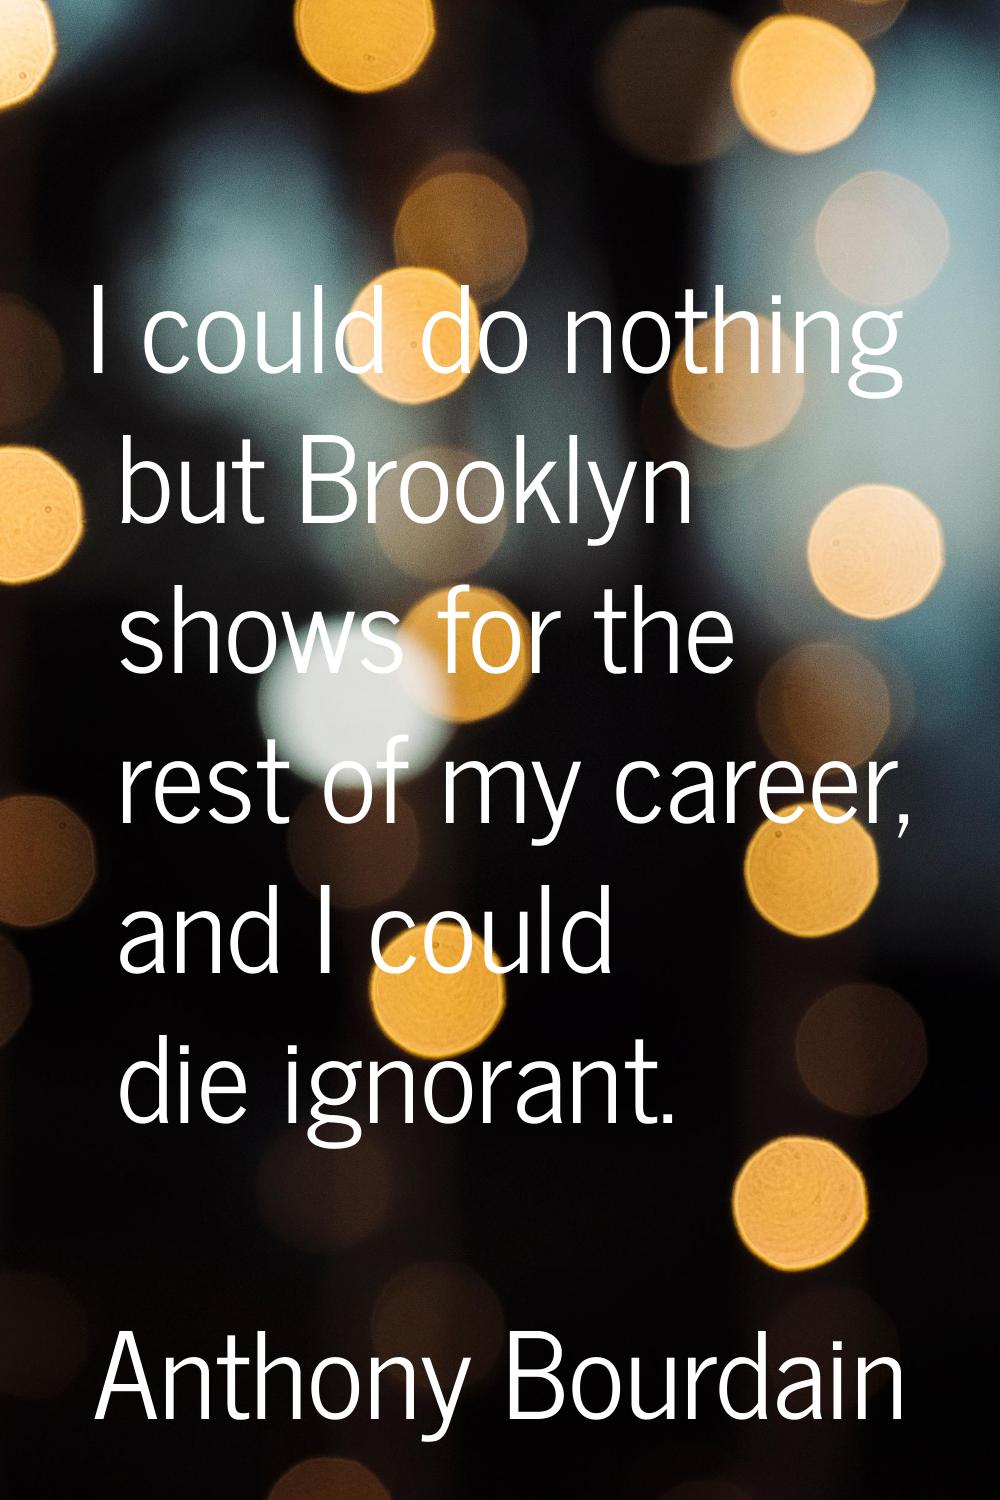 I could do nothing but Brooklyn shows for the rest of my career, and I could die ignorant.